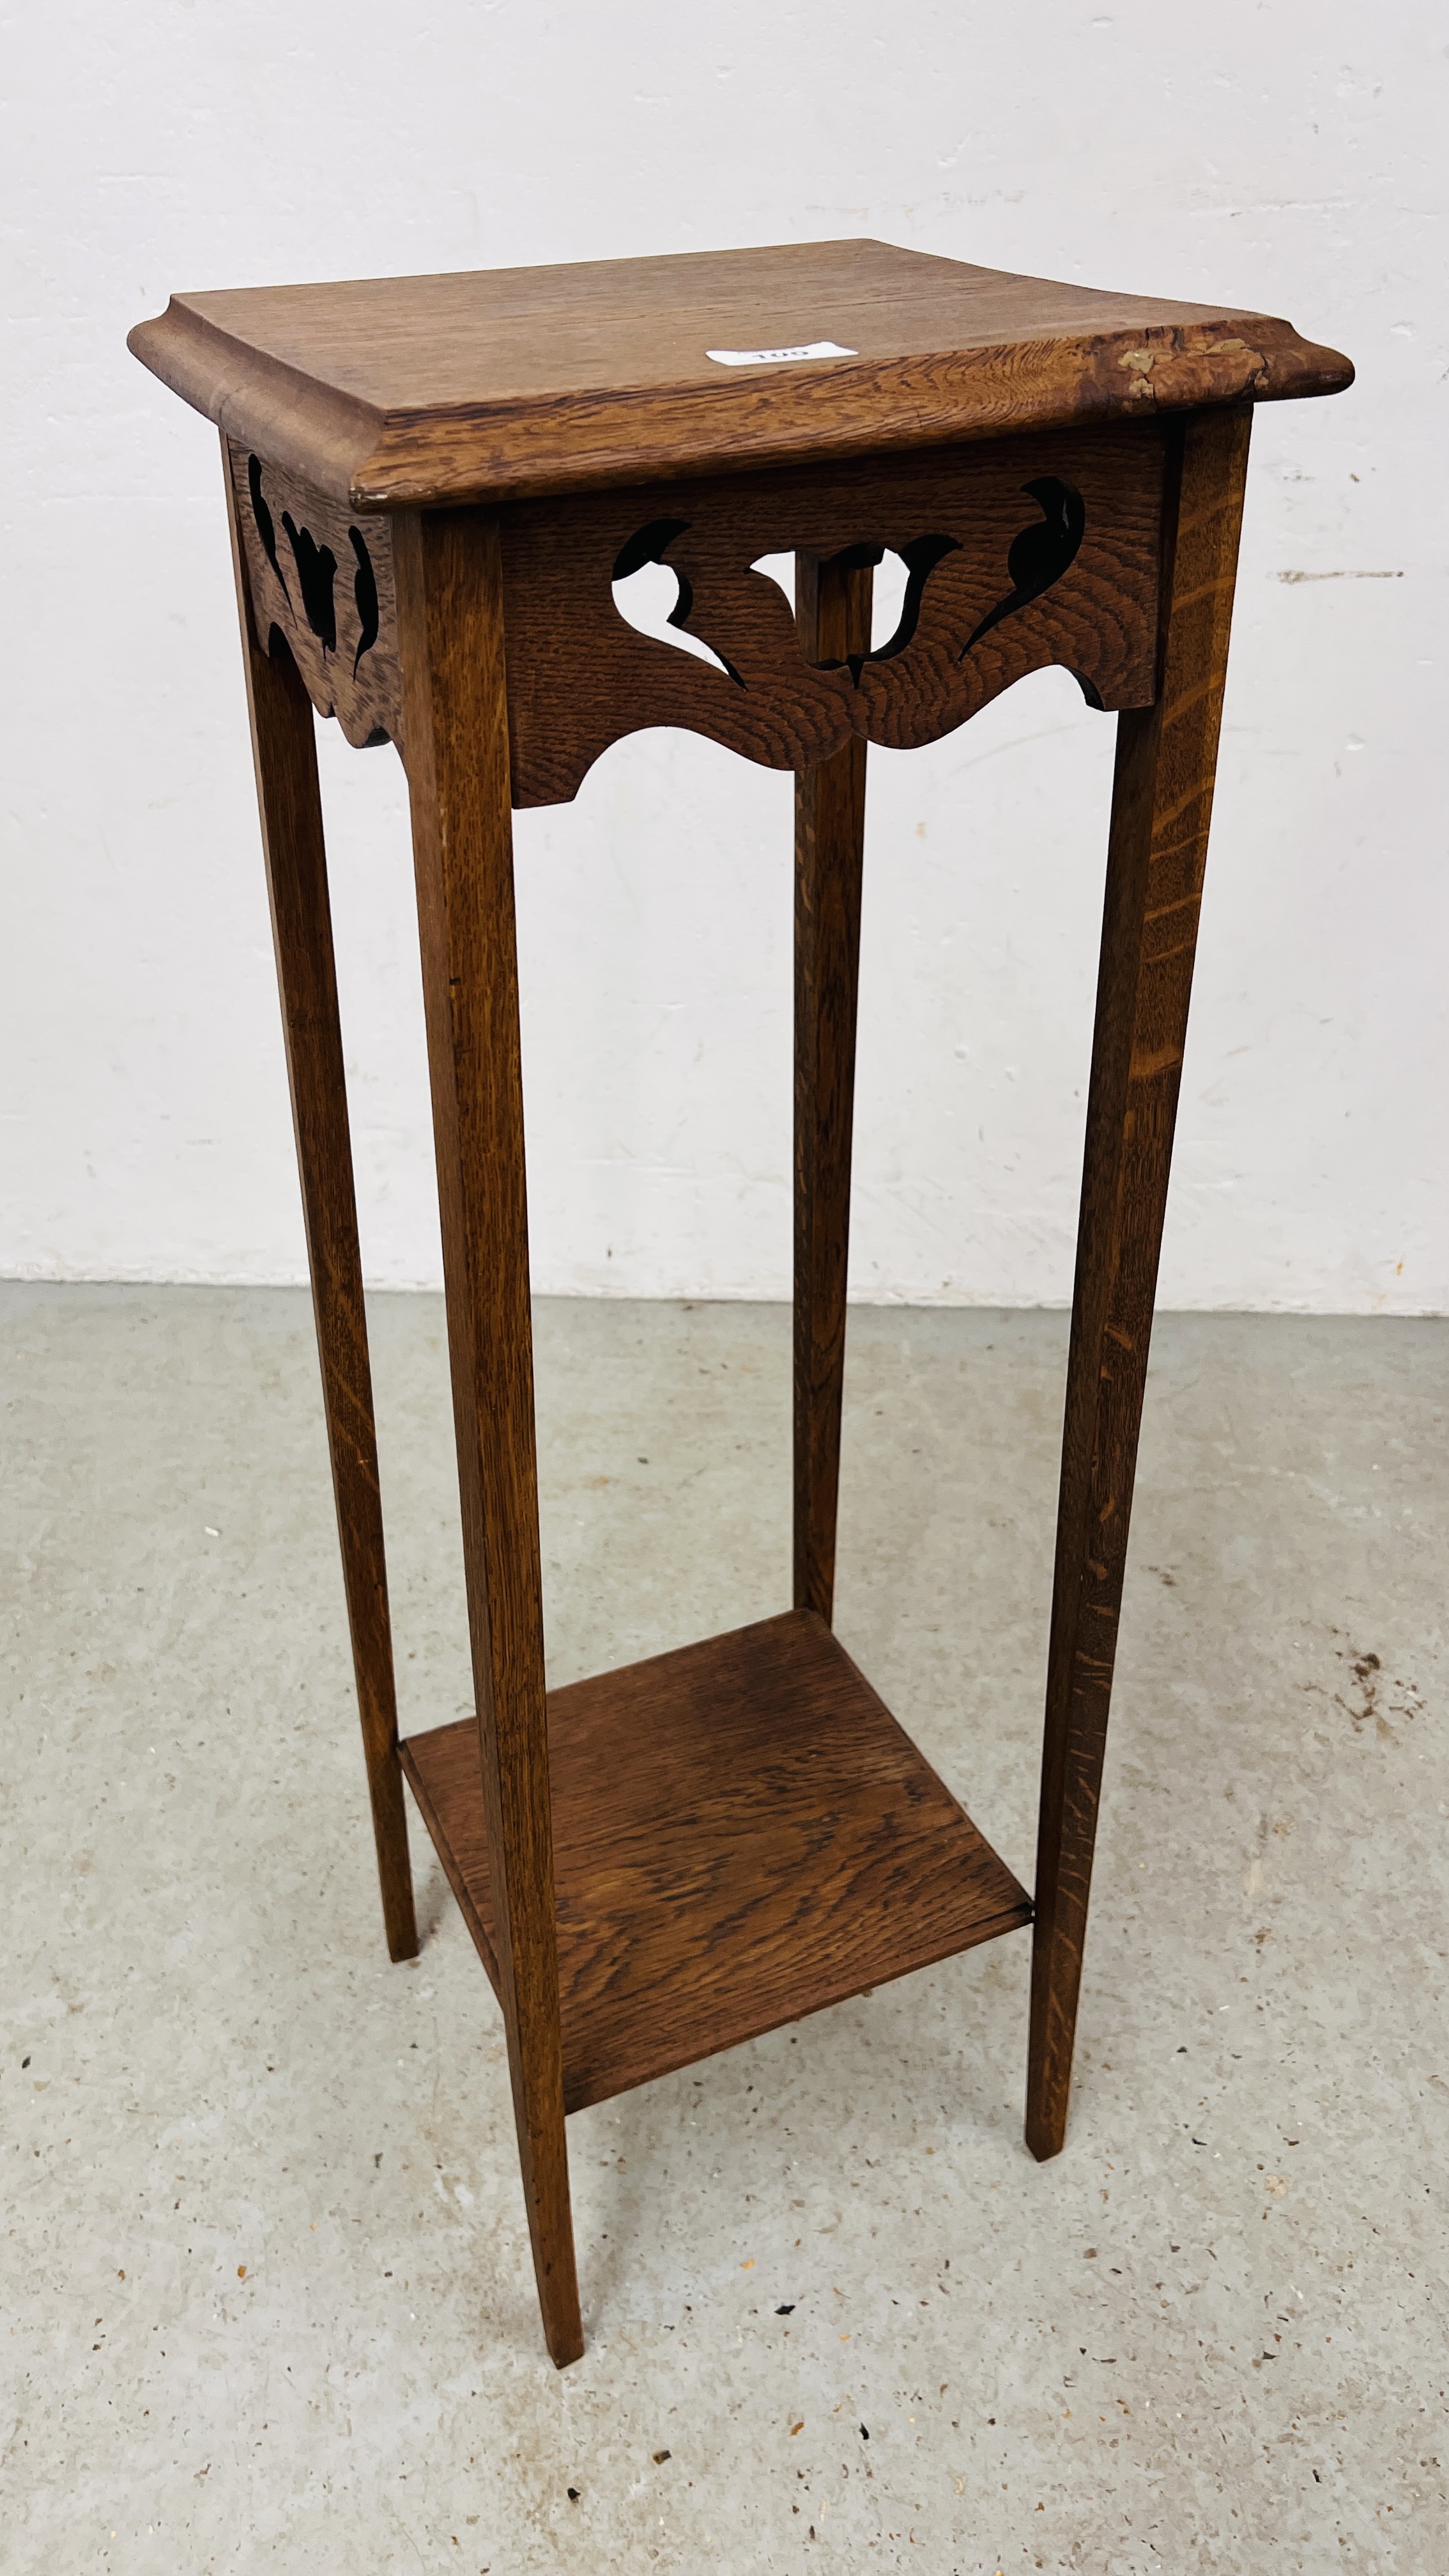 A VINTAGE OAK PLANT STAND WITH FRETT WORK DETAIL. - Image 5 of 6